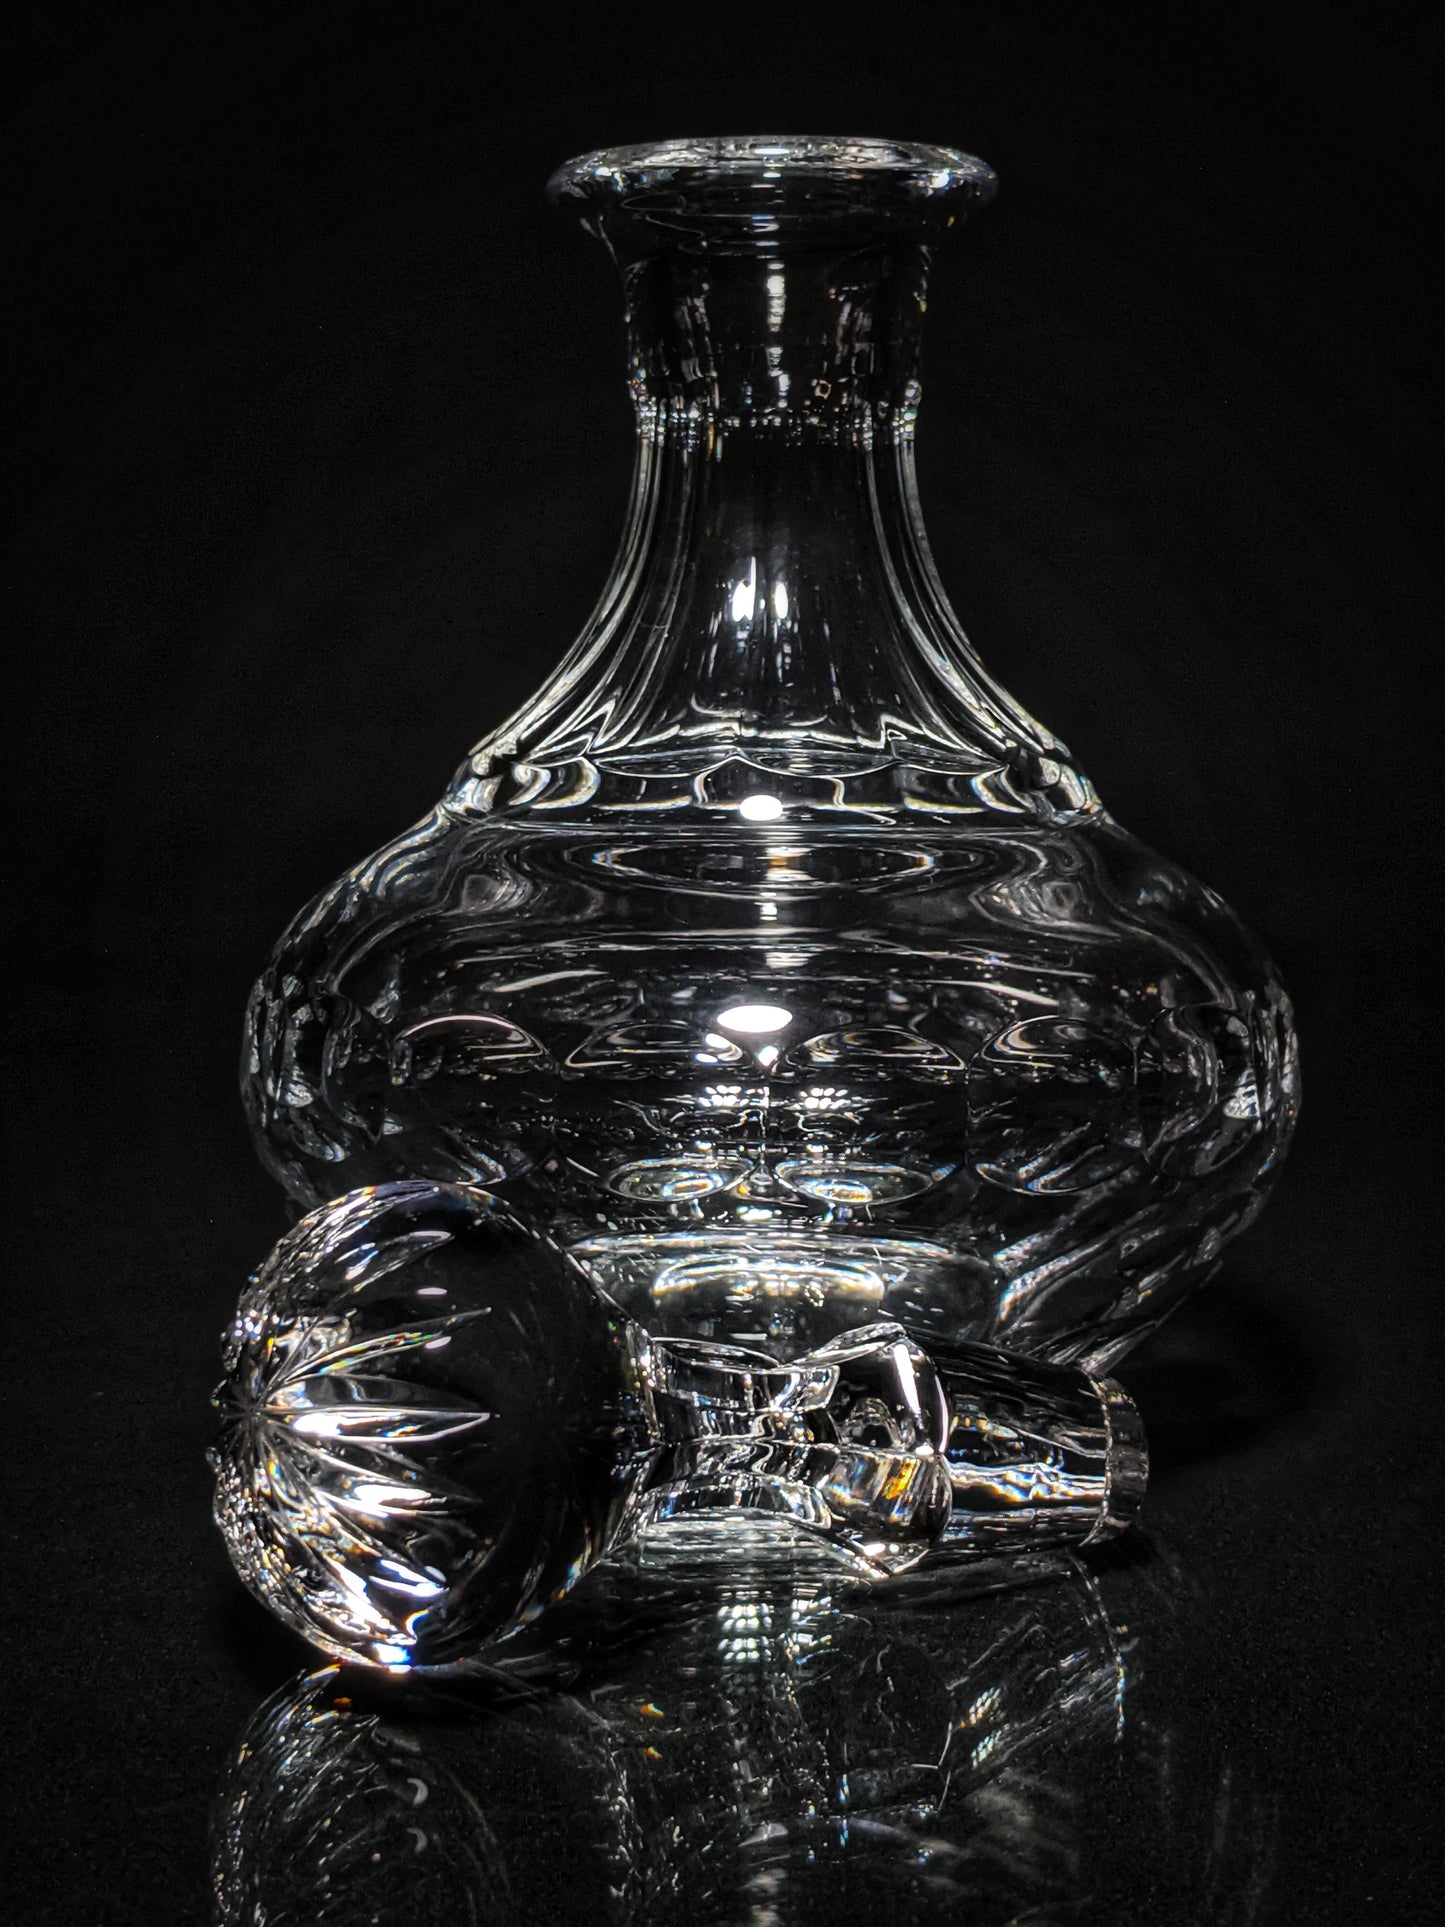 Faberge Countess Crystal 9" Decanter